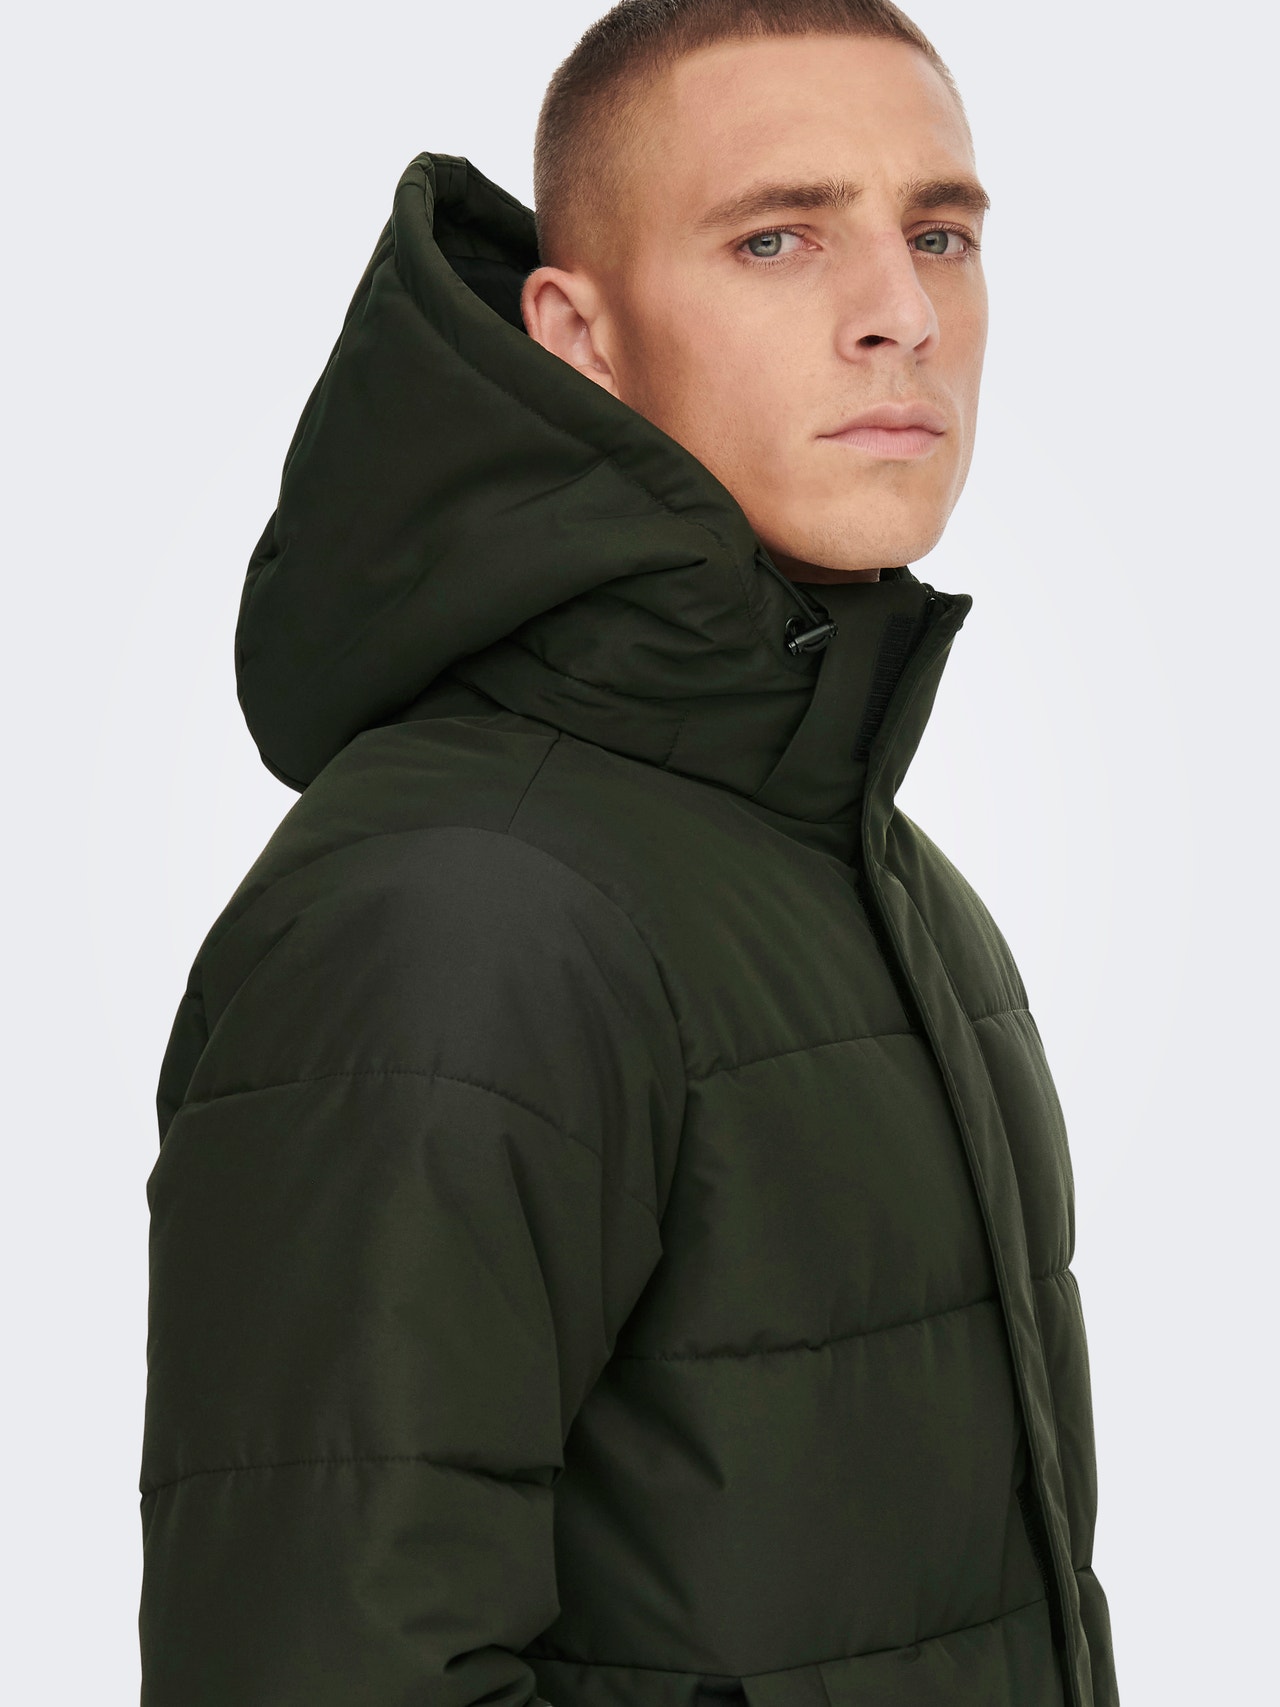 ONLY & SONS Jacket with detachable hood -Peat - 22020156